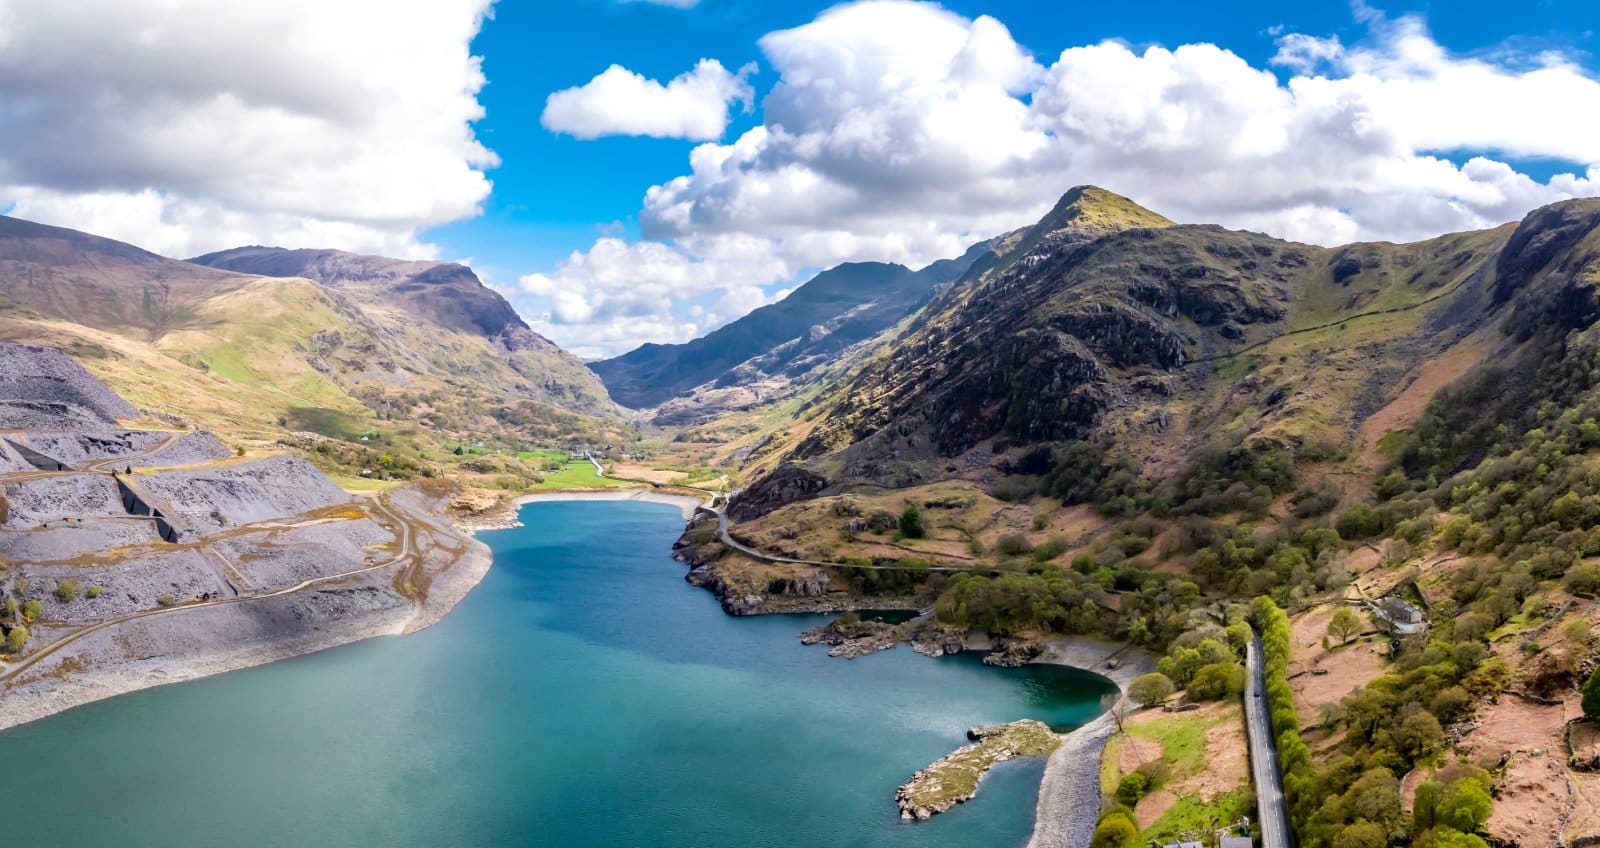 Image Credit: Shutterstock / Lukassek <p>Venturing into Wales, Snowdonia presents itself as a natural water feature, where the rain adds an almost mythical quality to the landscape. It’s the kind of place where you learn to appreciate the sound of water in all its forms, from drizzle to downpour.</p>